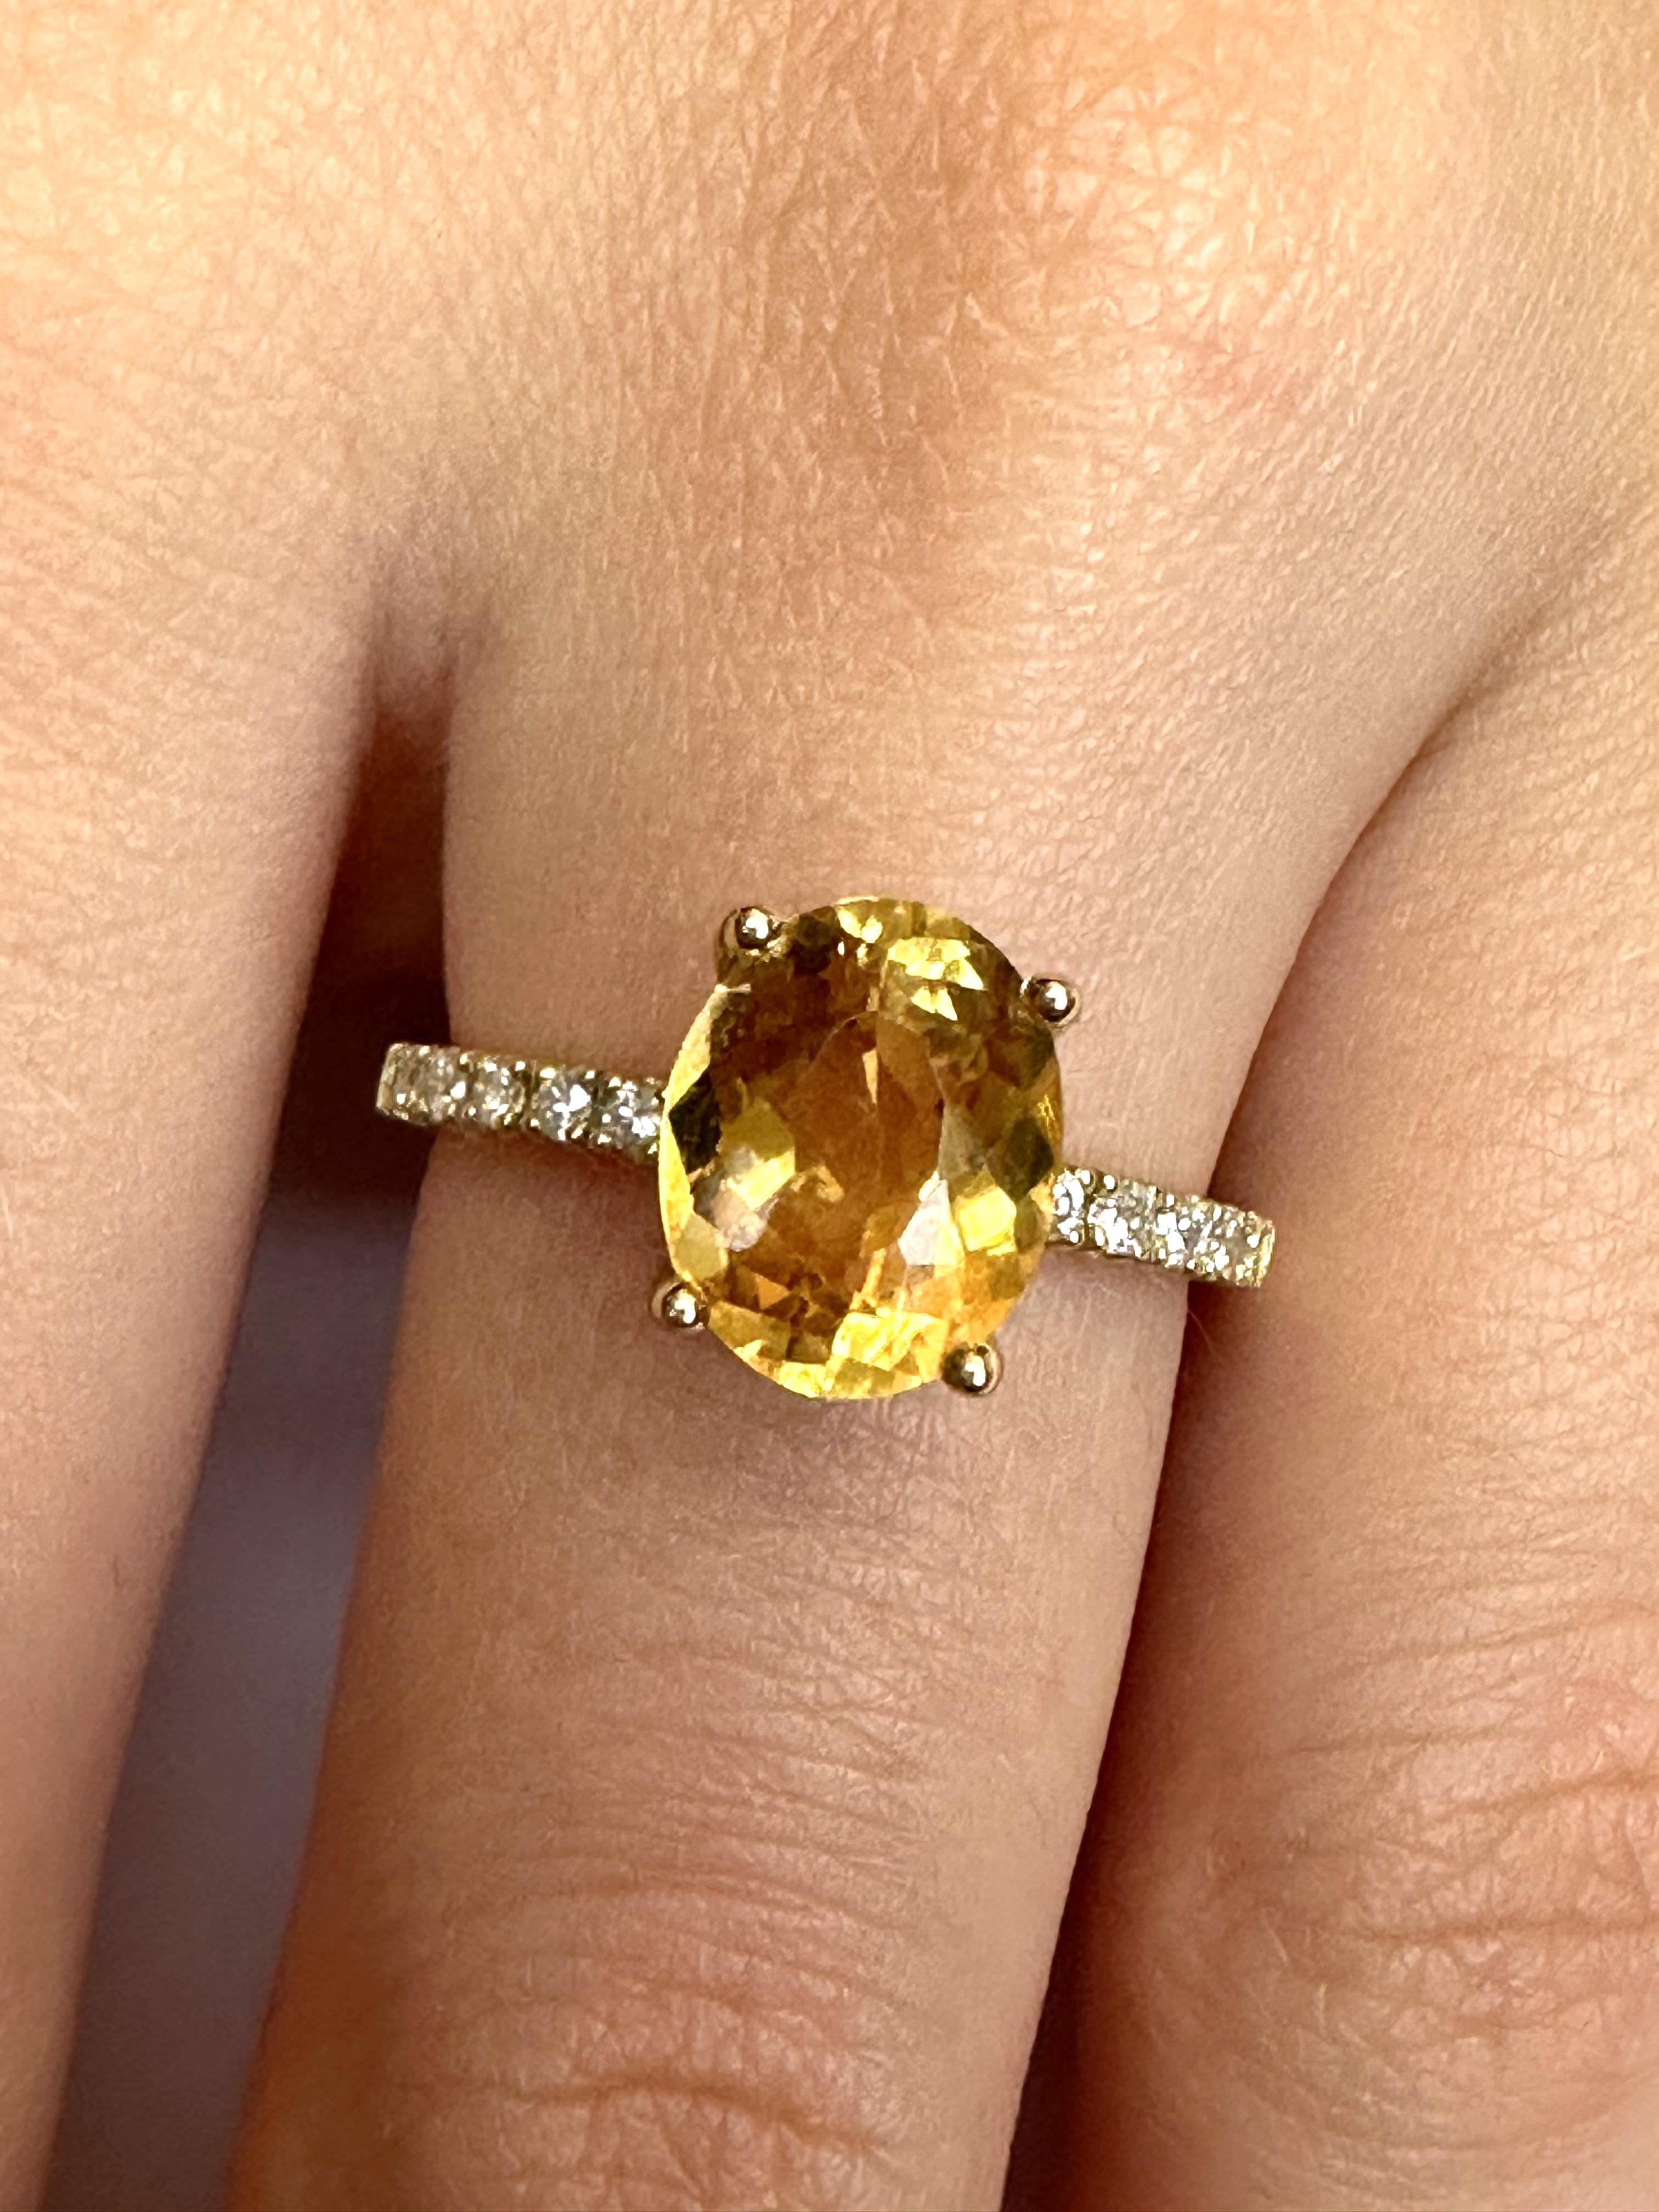 Eliania Rosetti's studio in São Paulo/Brazil designed this elegant solitaire and engagement ring in 3D programming.
Its main stone is a beautiful oval-shaped citrine measuring 10 x 8 mm and 5 diamonds measuring 1.5 mm on each side of this stone, a